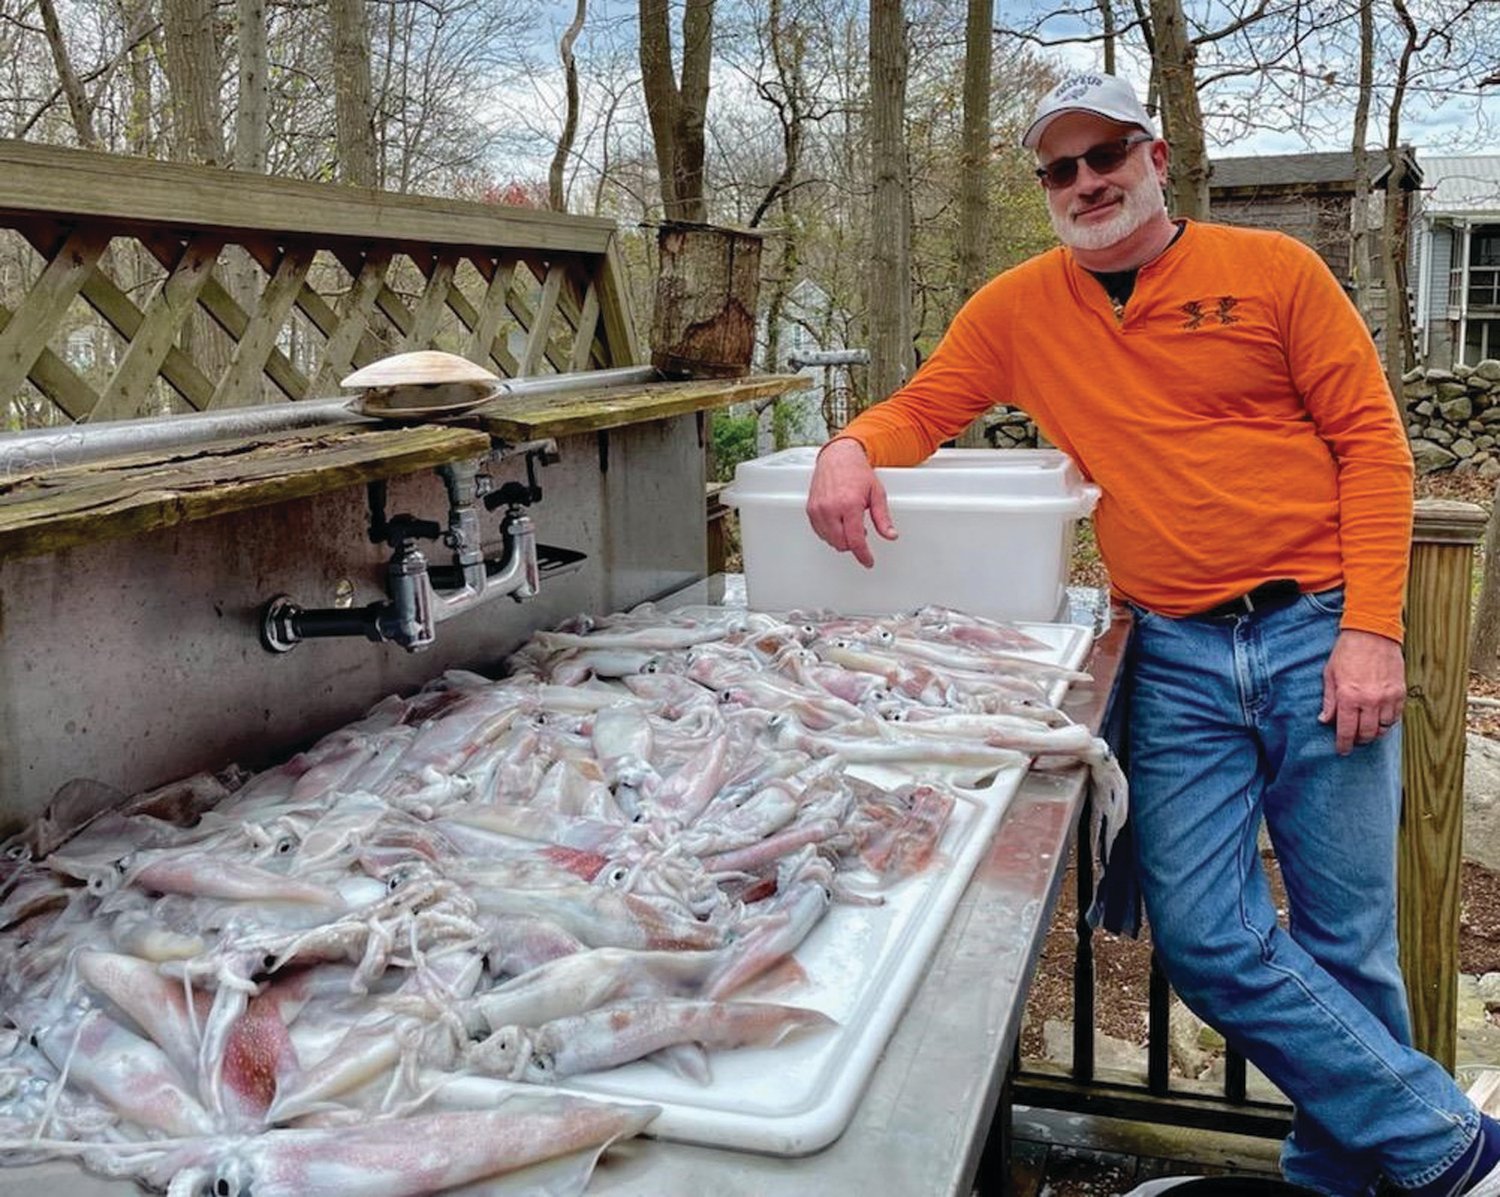 Capt. Mike Littlefield of Archangel Charters said, “Last week we had Greg Vespe of Tiverton, ‘The Squid Whisperer’, on board and we caught five (five gallons) pales of squid.”